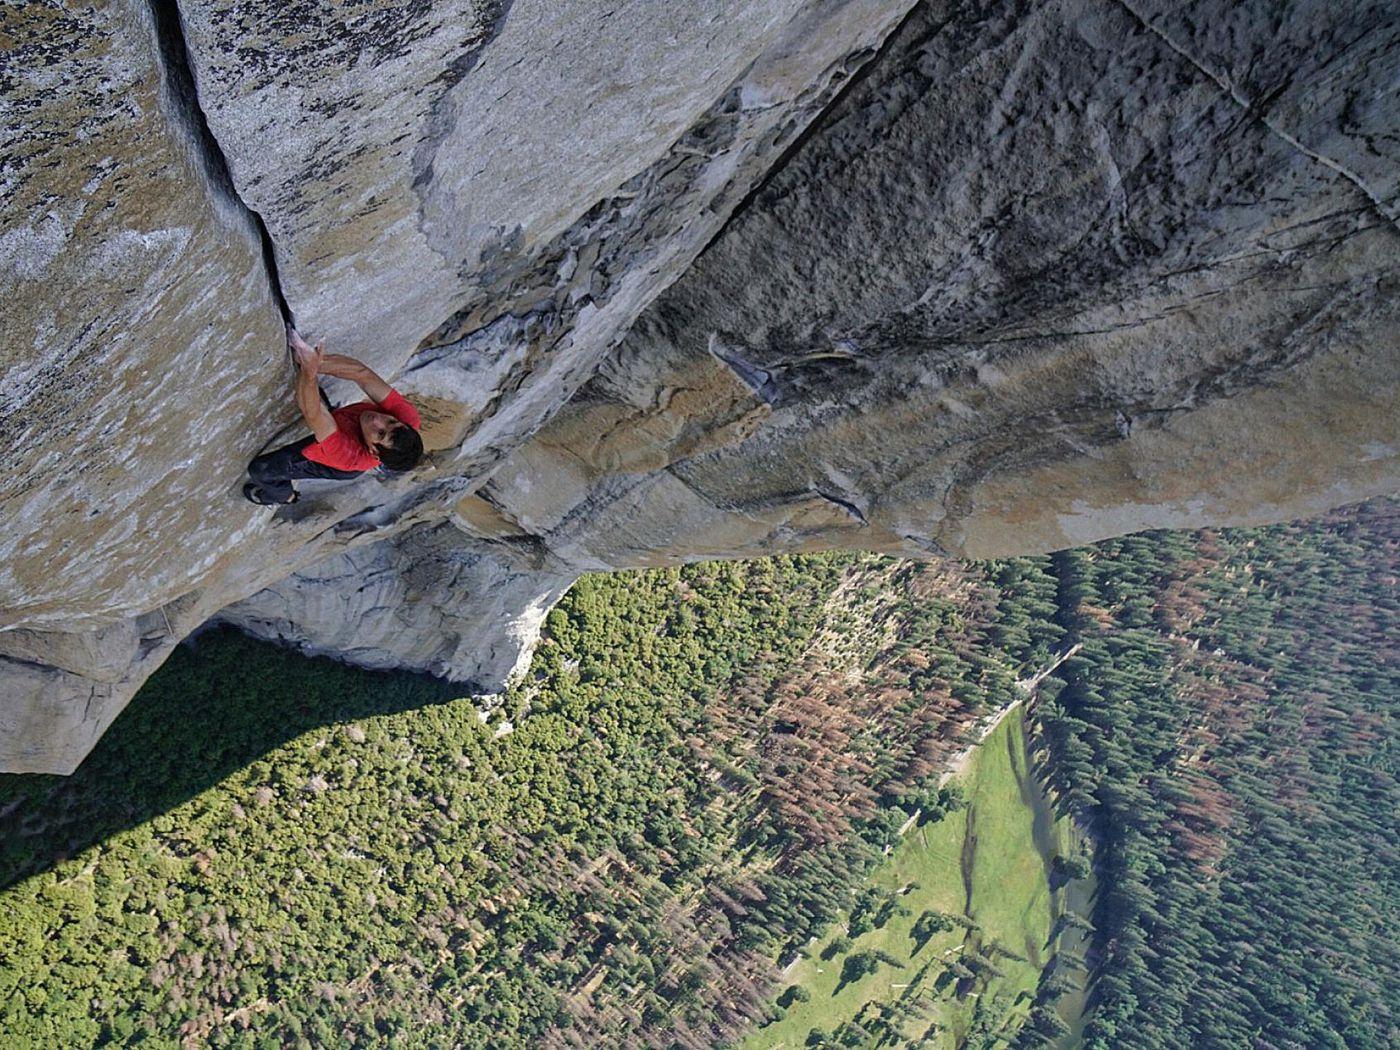 Now in theaters: Free Solo